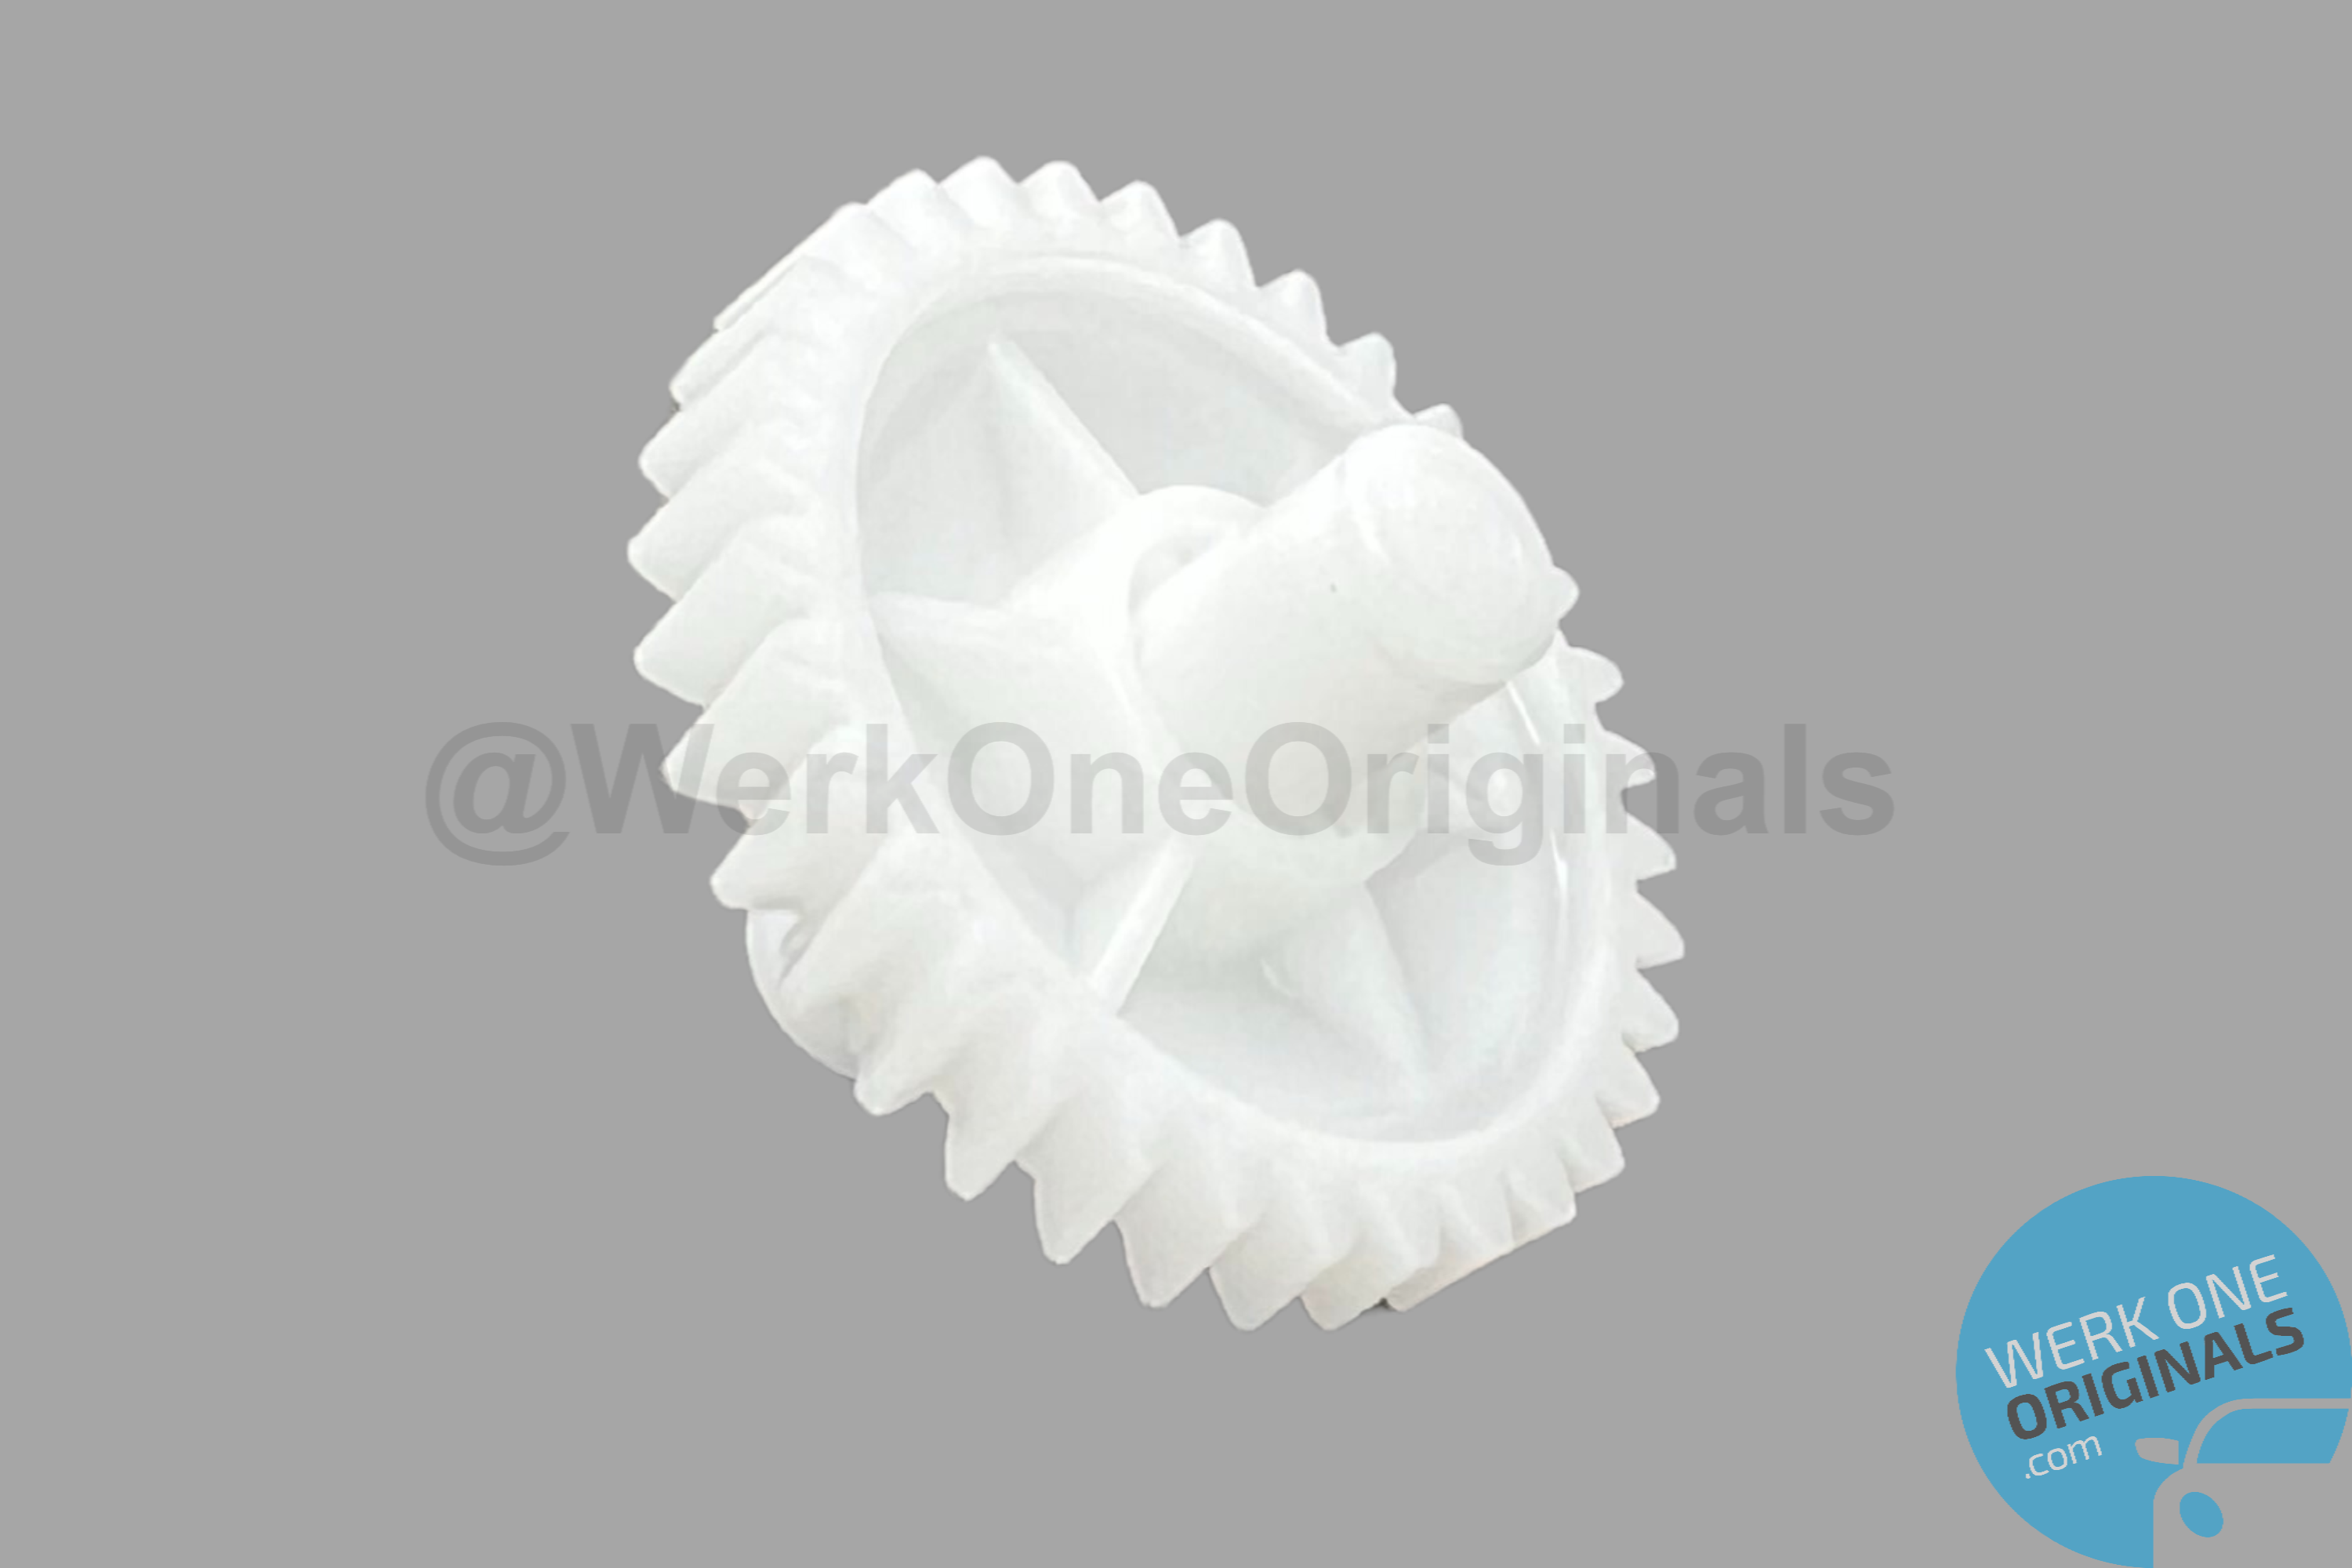 Porsche Genuine Replacement Sunroof Drive Gear for 924S Models